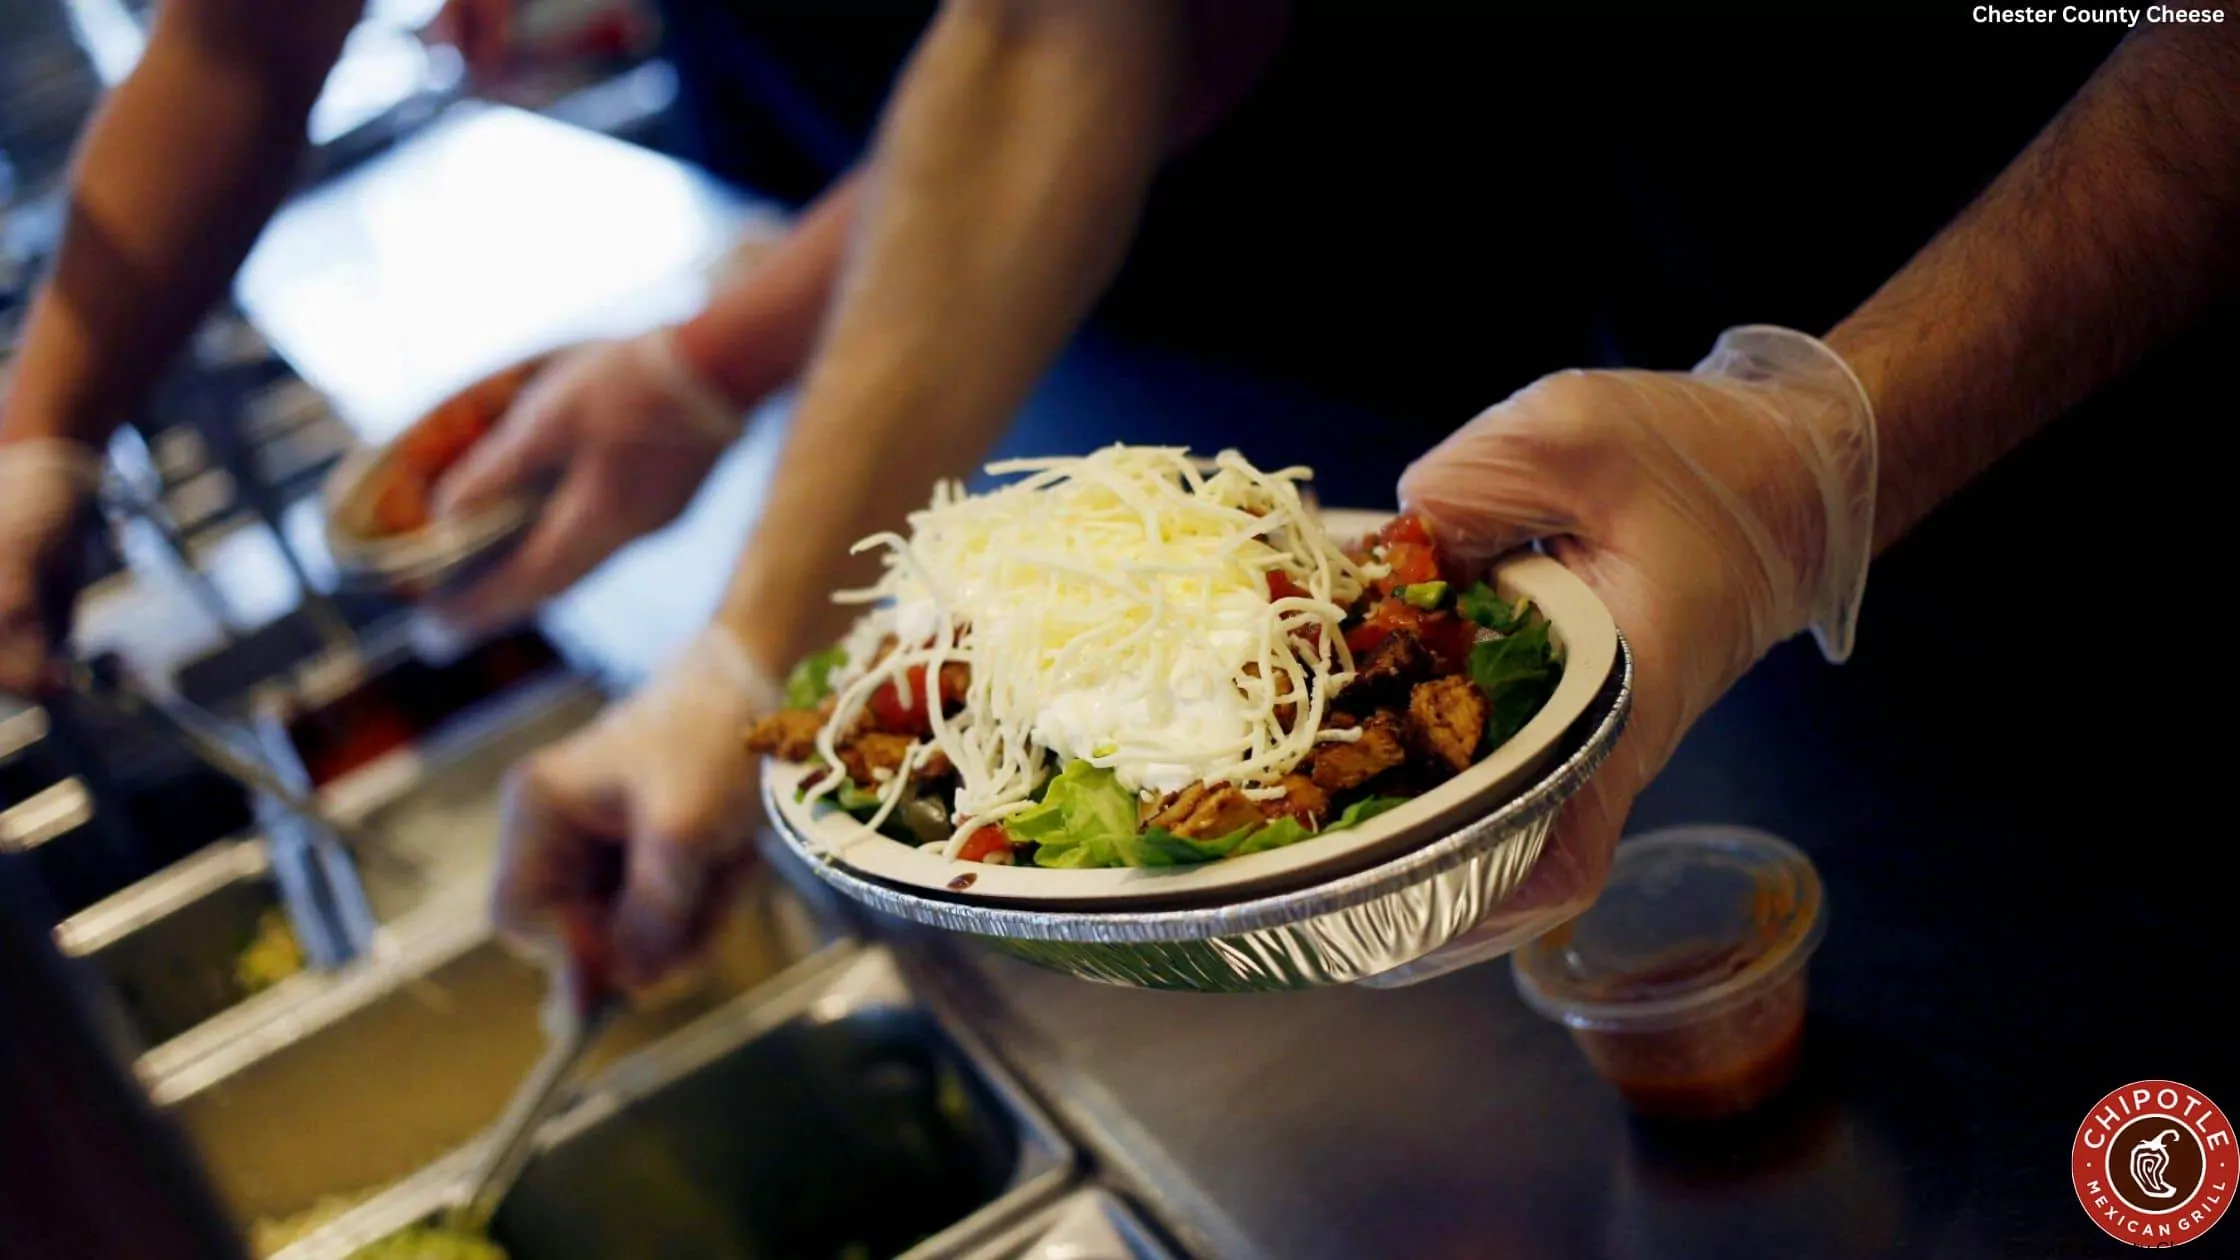 Is Chipotle’s Cheese Healthy